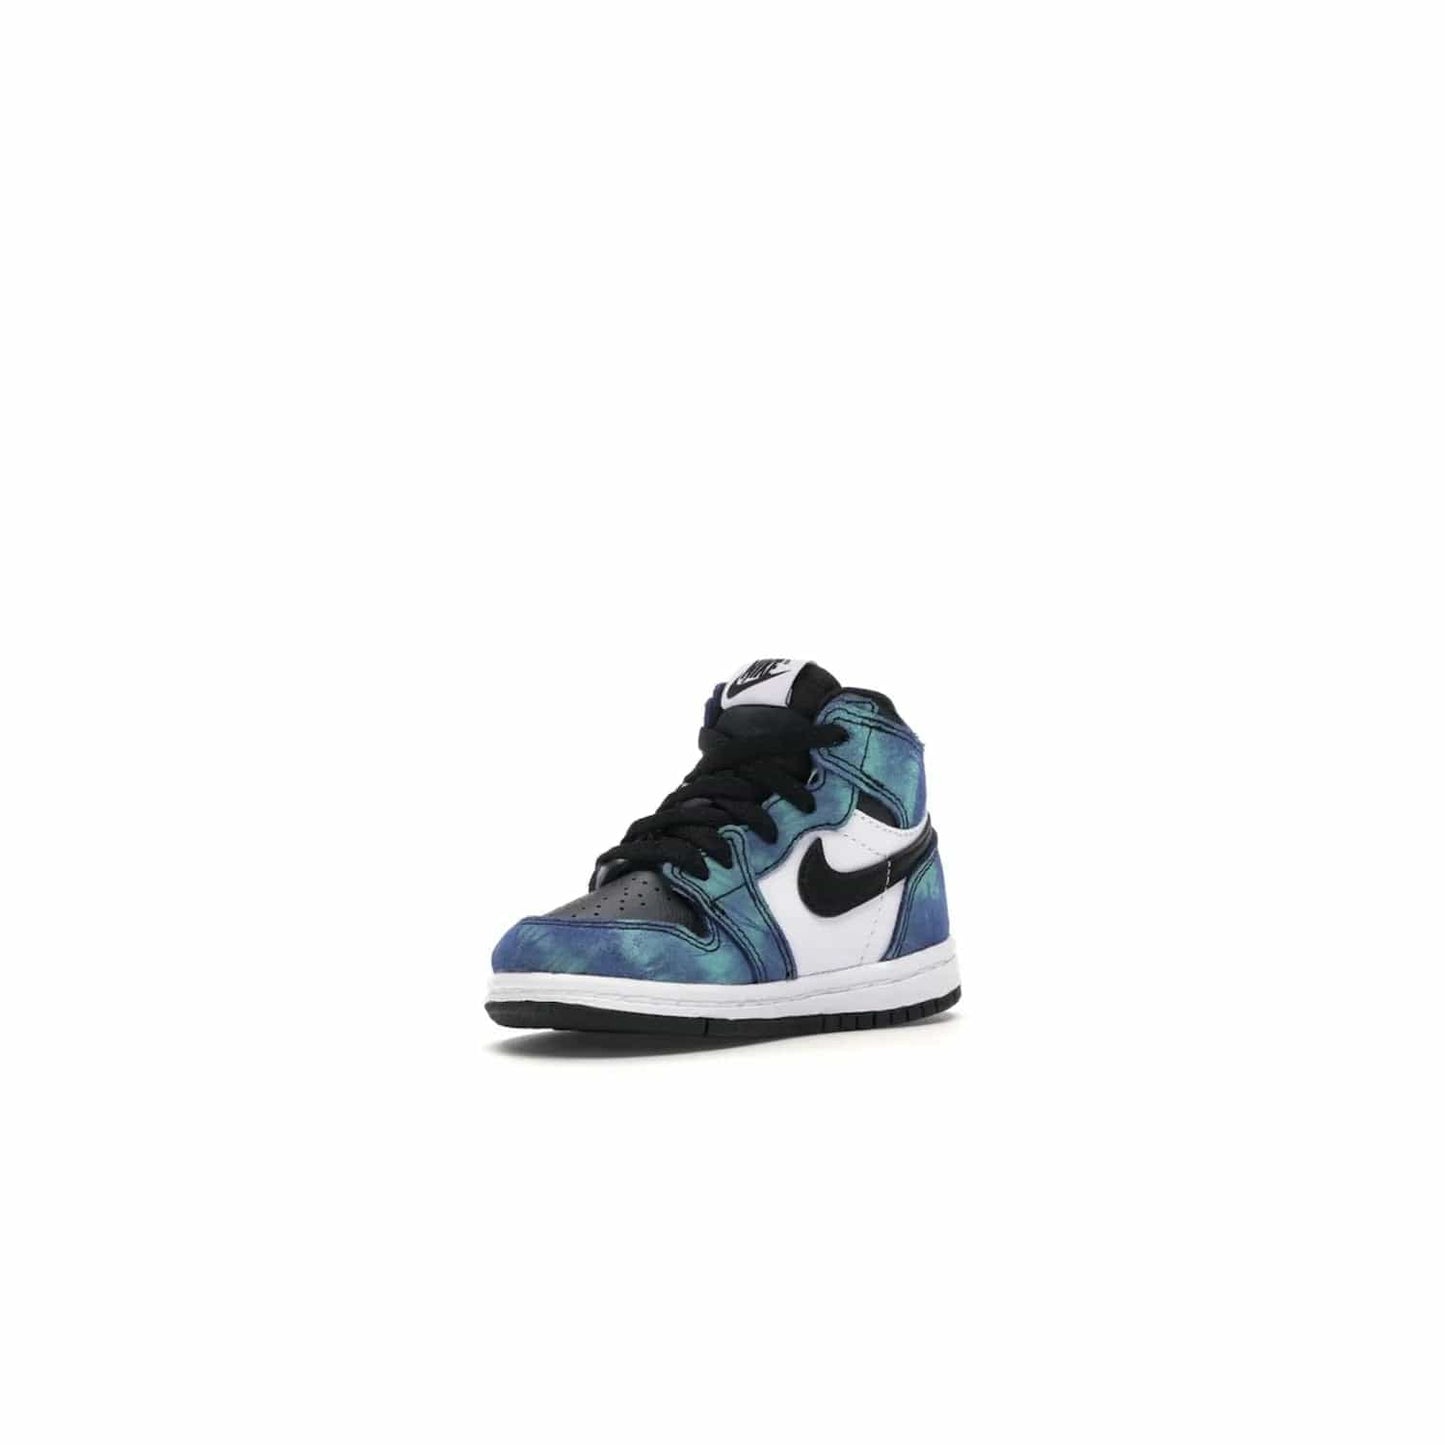 Jordan 1 Retro High Tie Dye (TD) - Image 15 - Only at www.BallersClubKickz.com - Add a unique twist to your sneaker collection with the Jordan 1 Retro High Tie Dye (TD). Classic Air Jordan 1 details like toe box perforations and the signature Swoosh logo on the sidewall are topped with an eye-catching tie dye design that’s perfect for styling all year round.